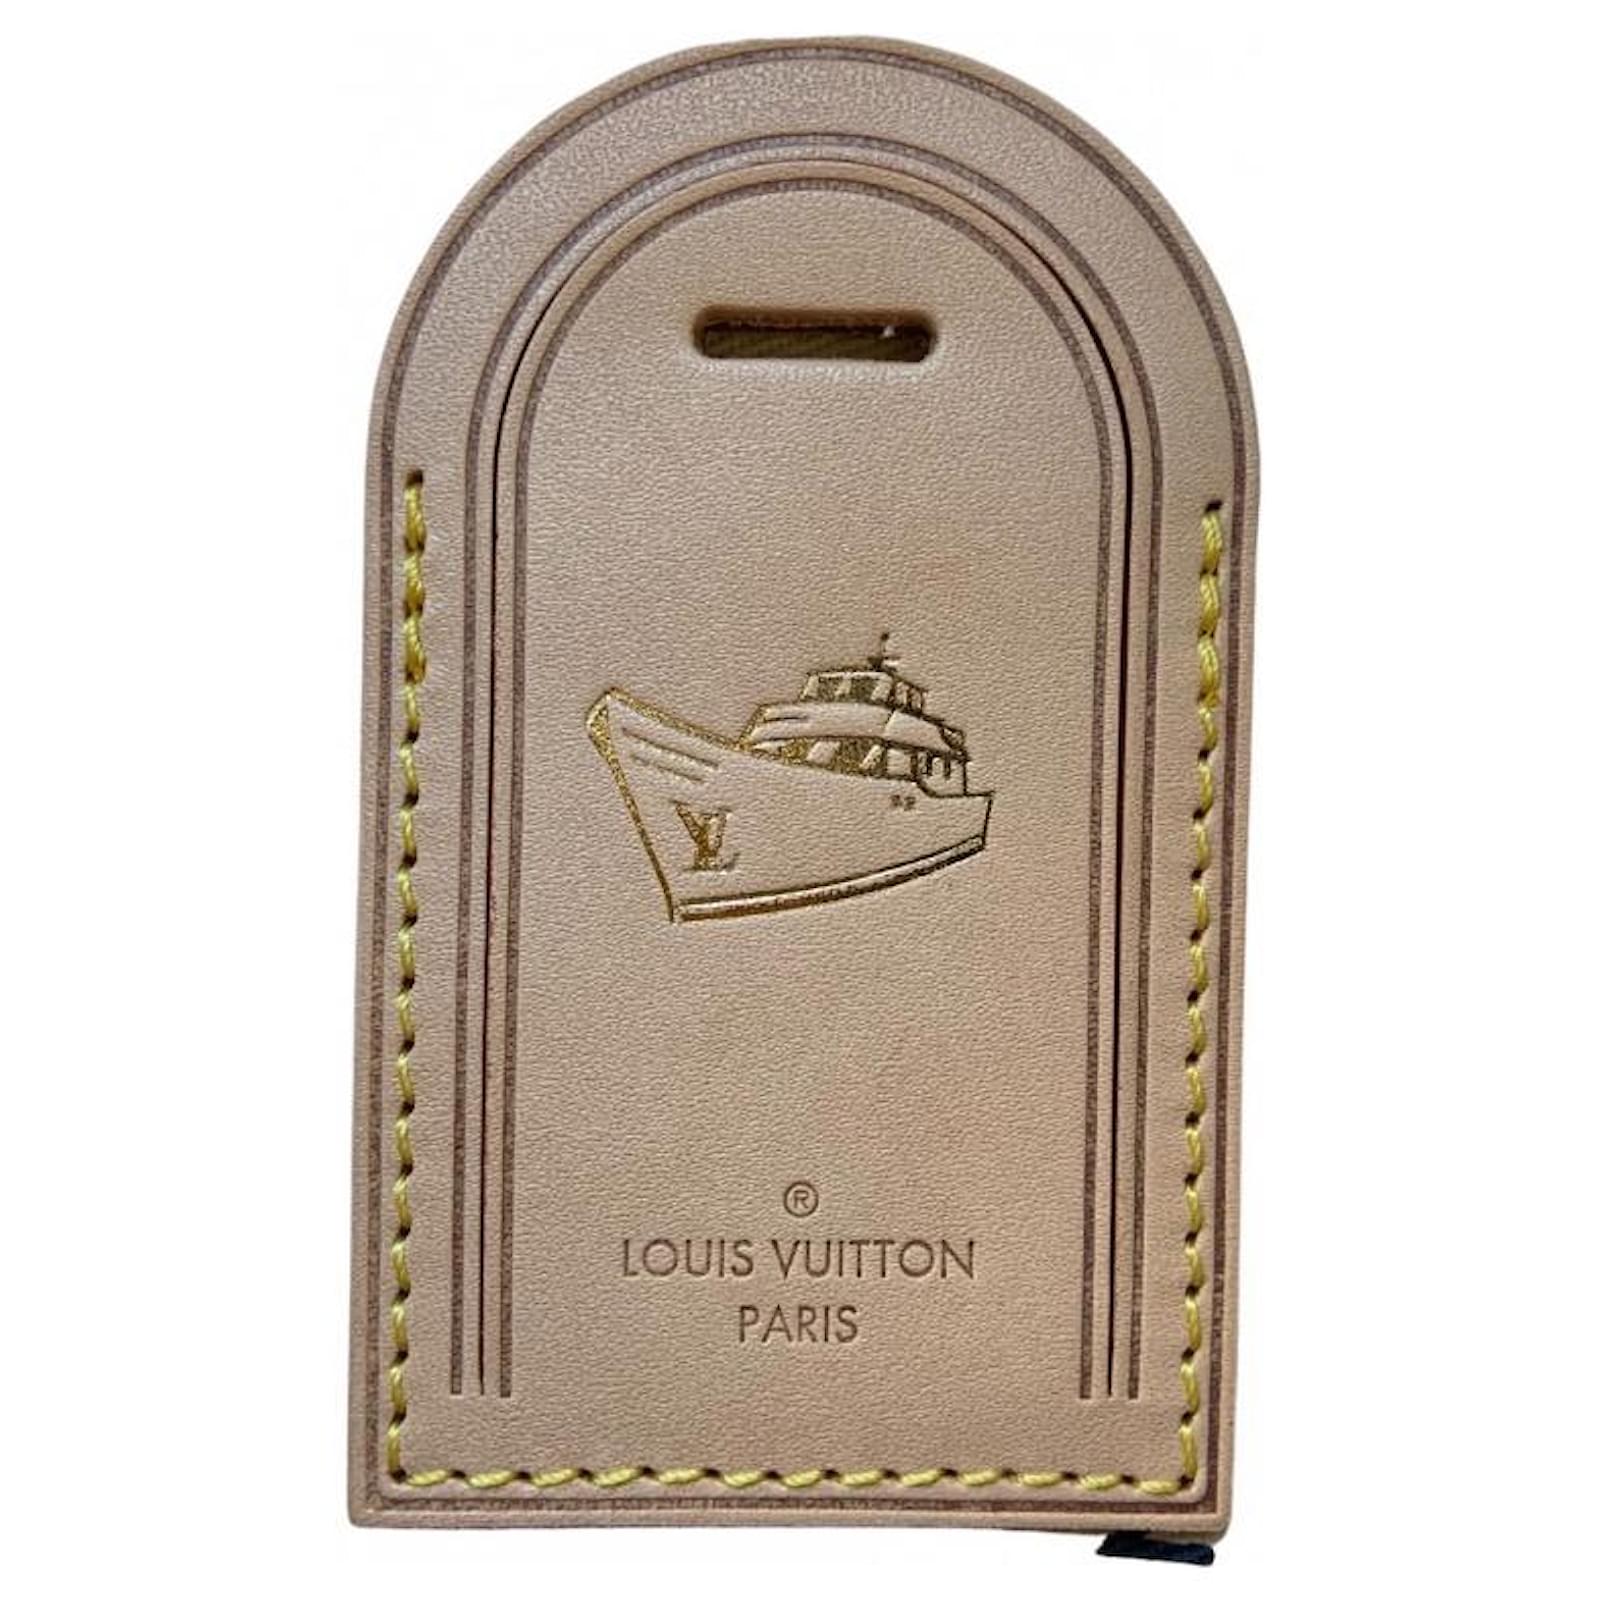 Louis Vuitton Large size luggage tag hot stamping Taiwan boat